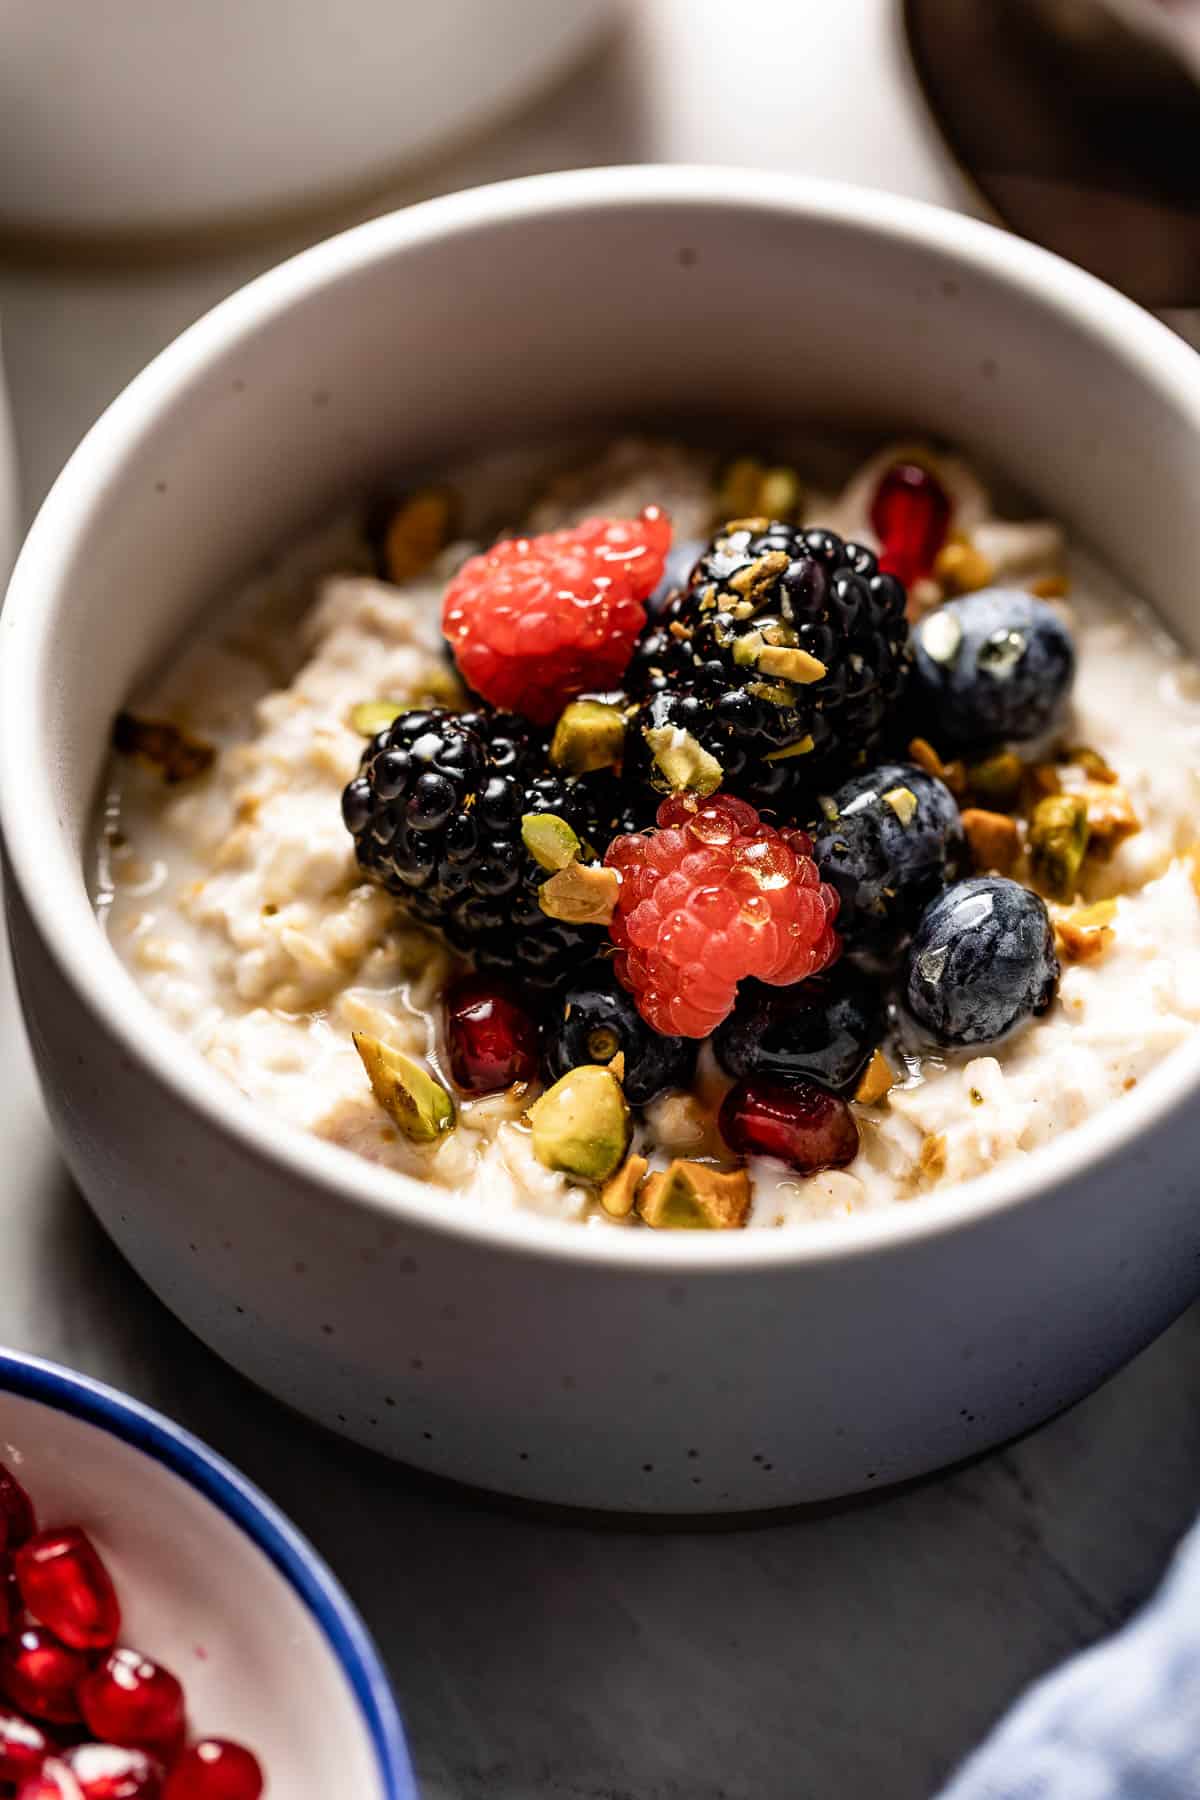 A bowl of oats topped with fruit and nuts from the side view.